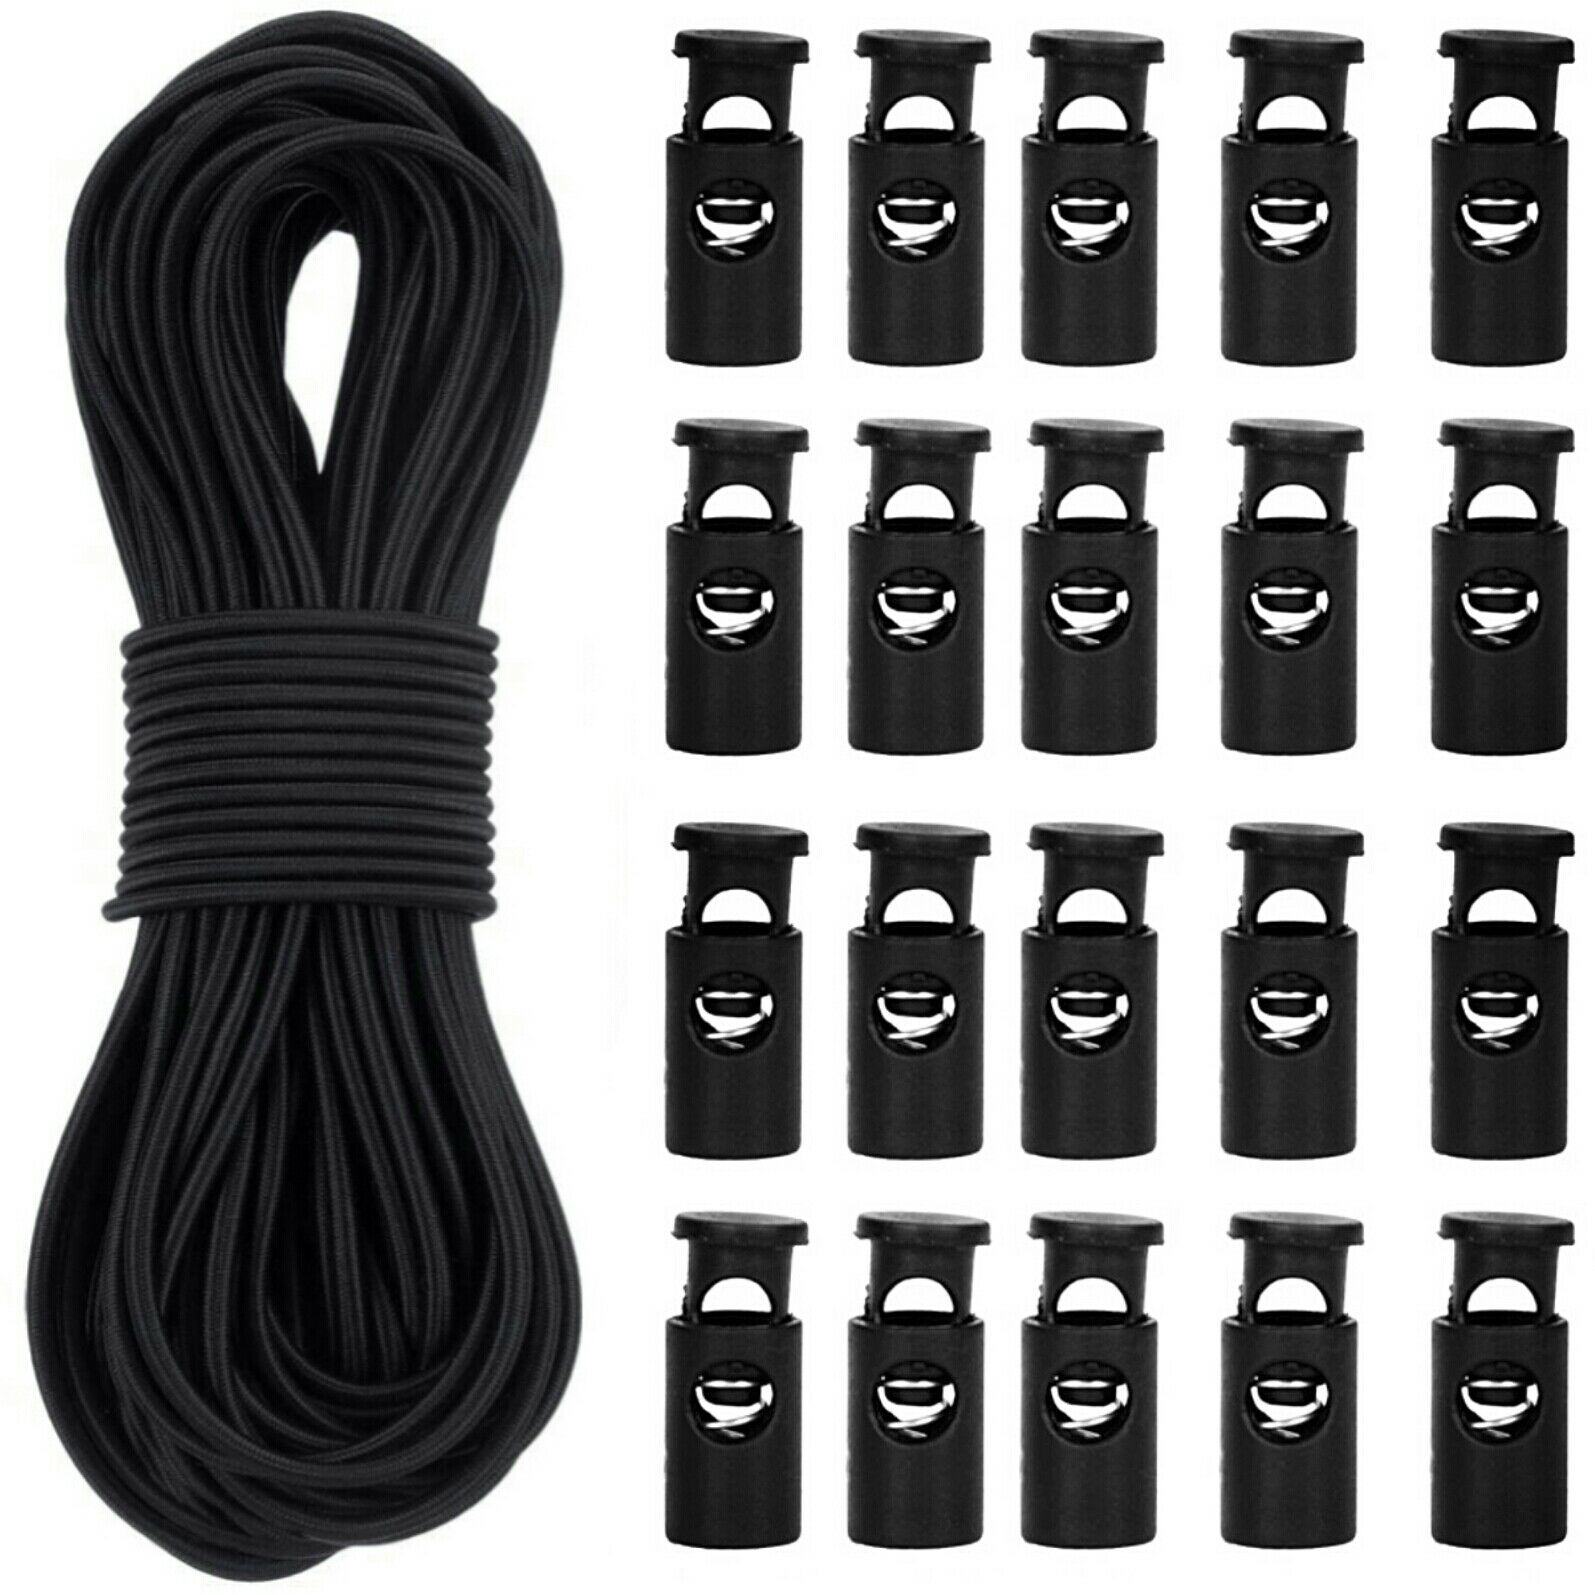 100pcs Cord Locks Toggle Stopper End With 1/8" X 50' Elastic Stretch Drawstring